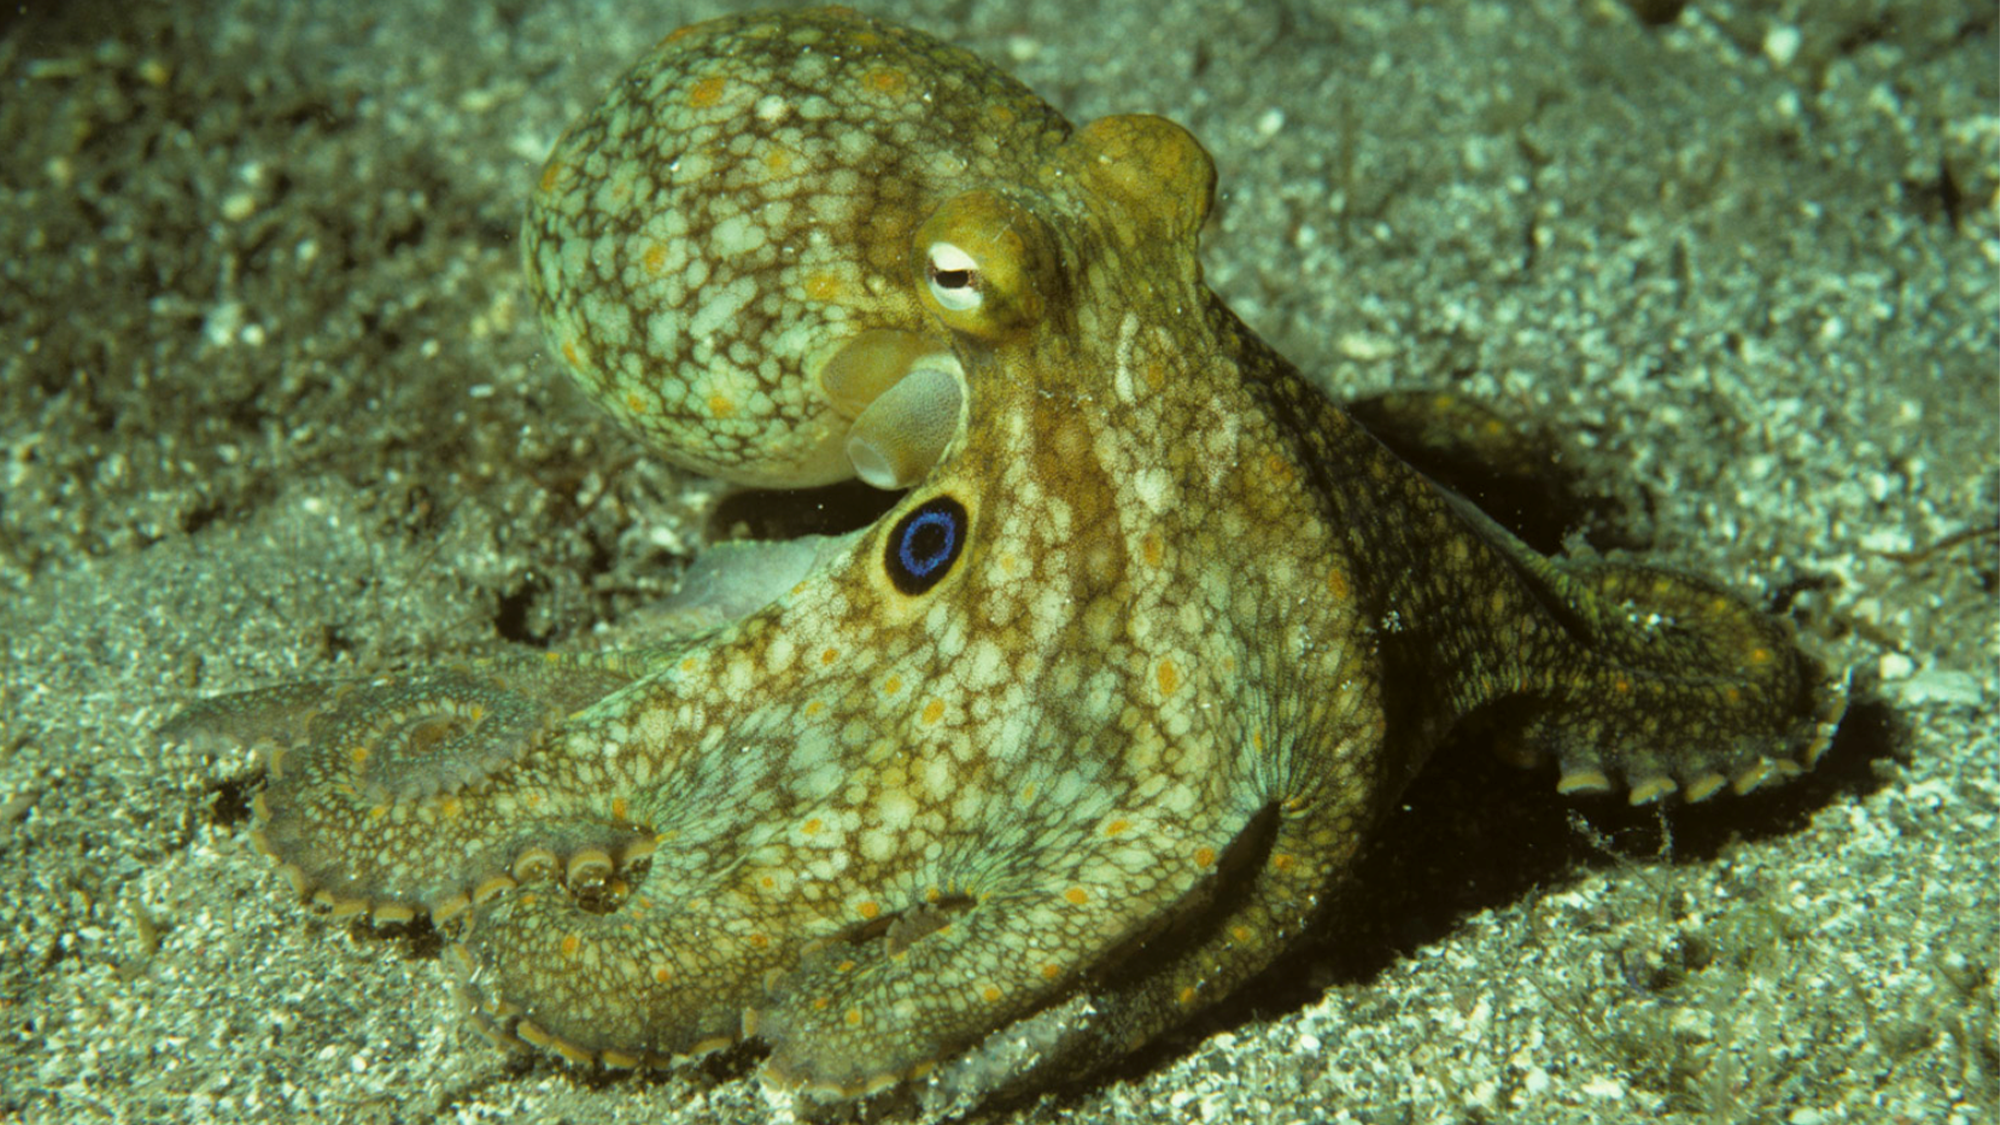 Octopuses rewrite their own RNA to survive freezing temperatures